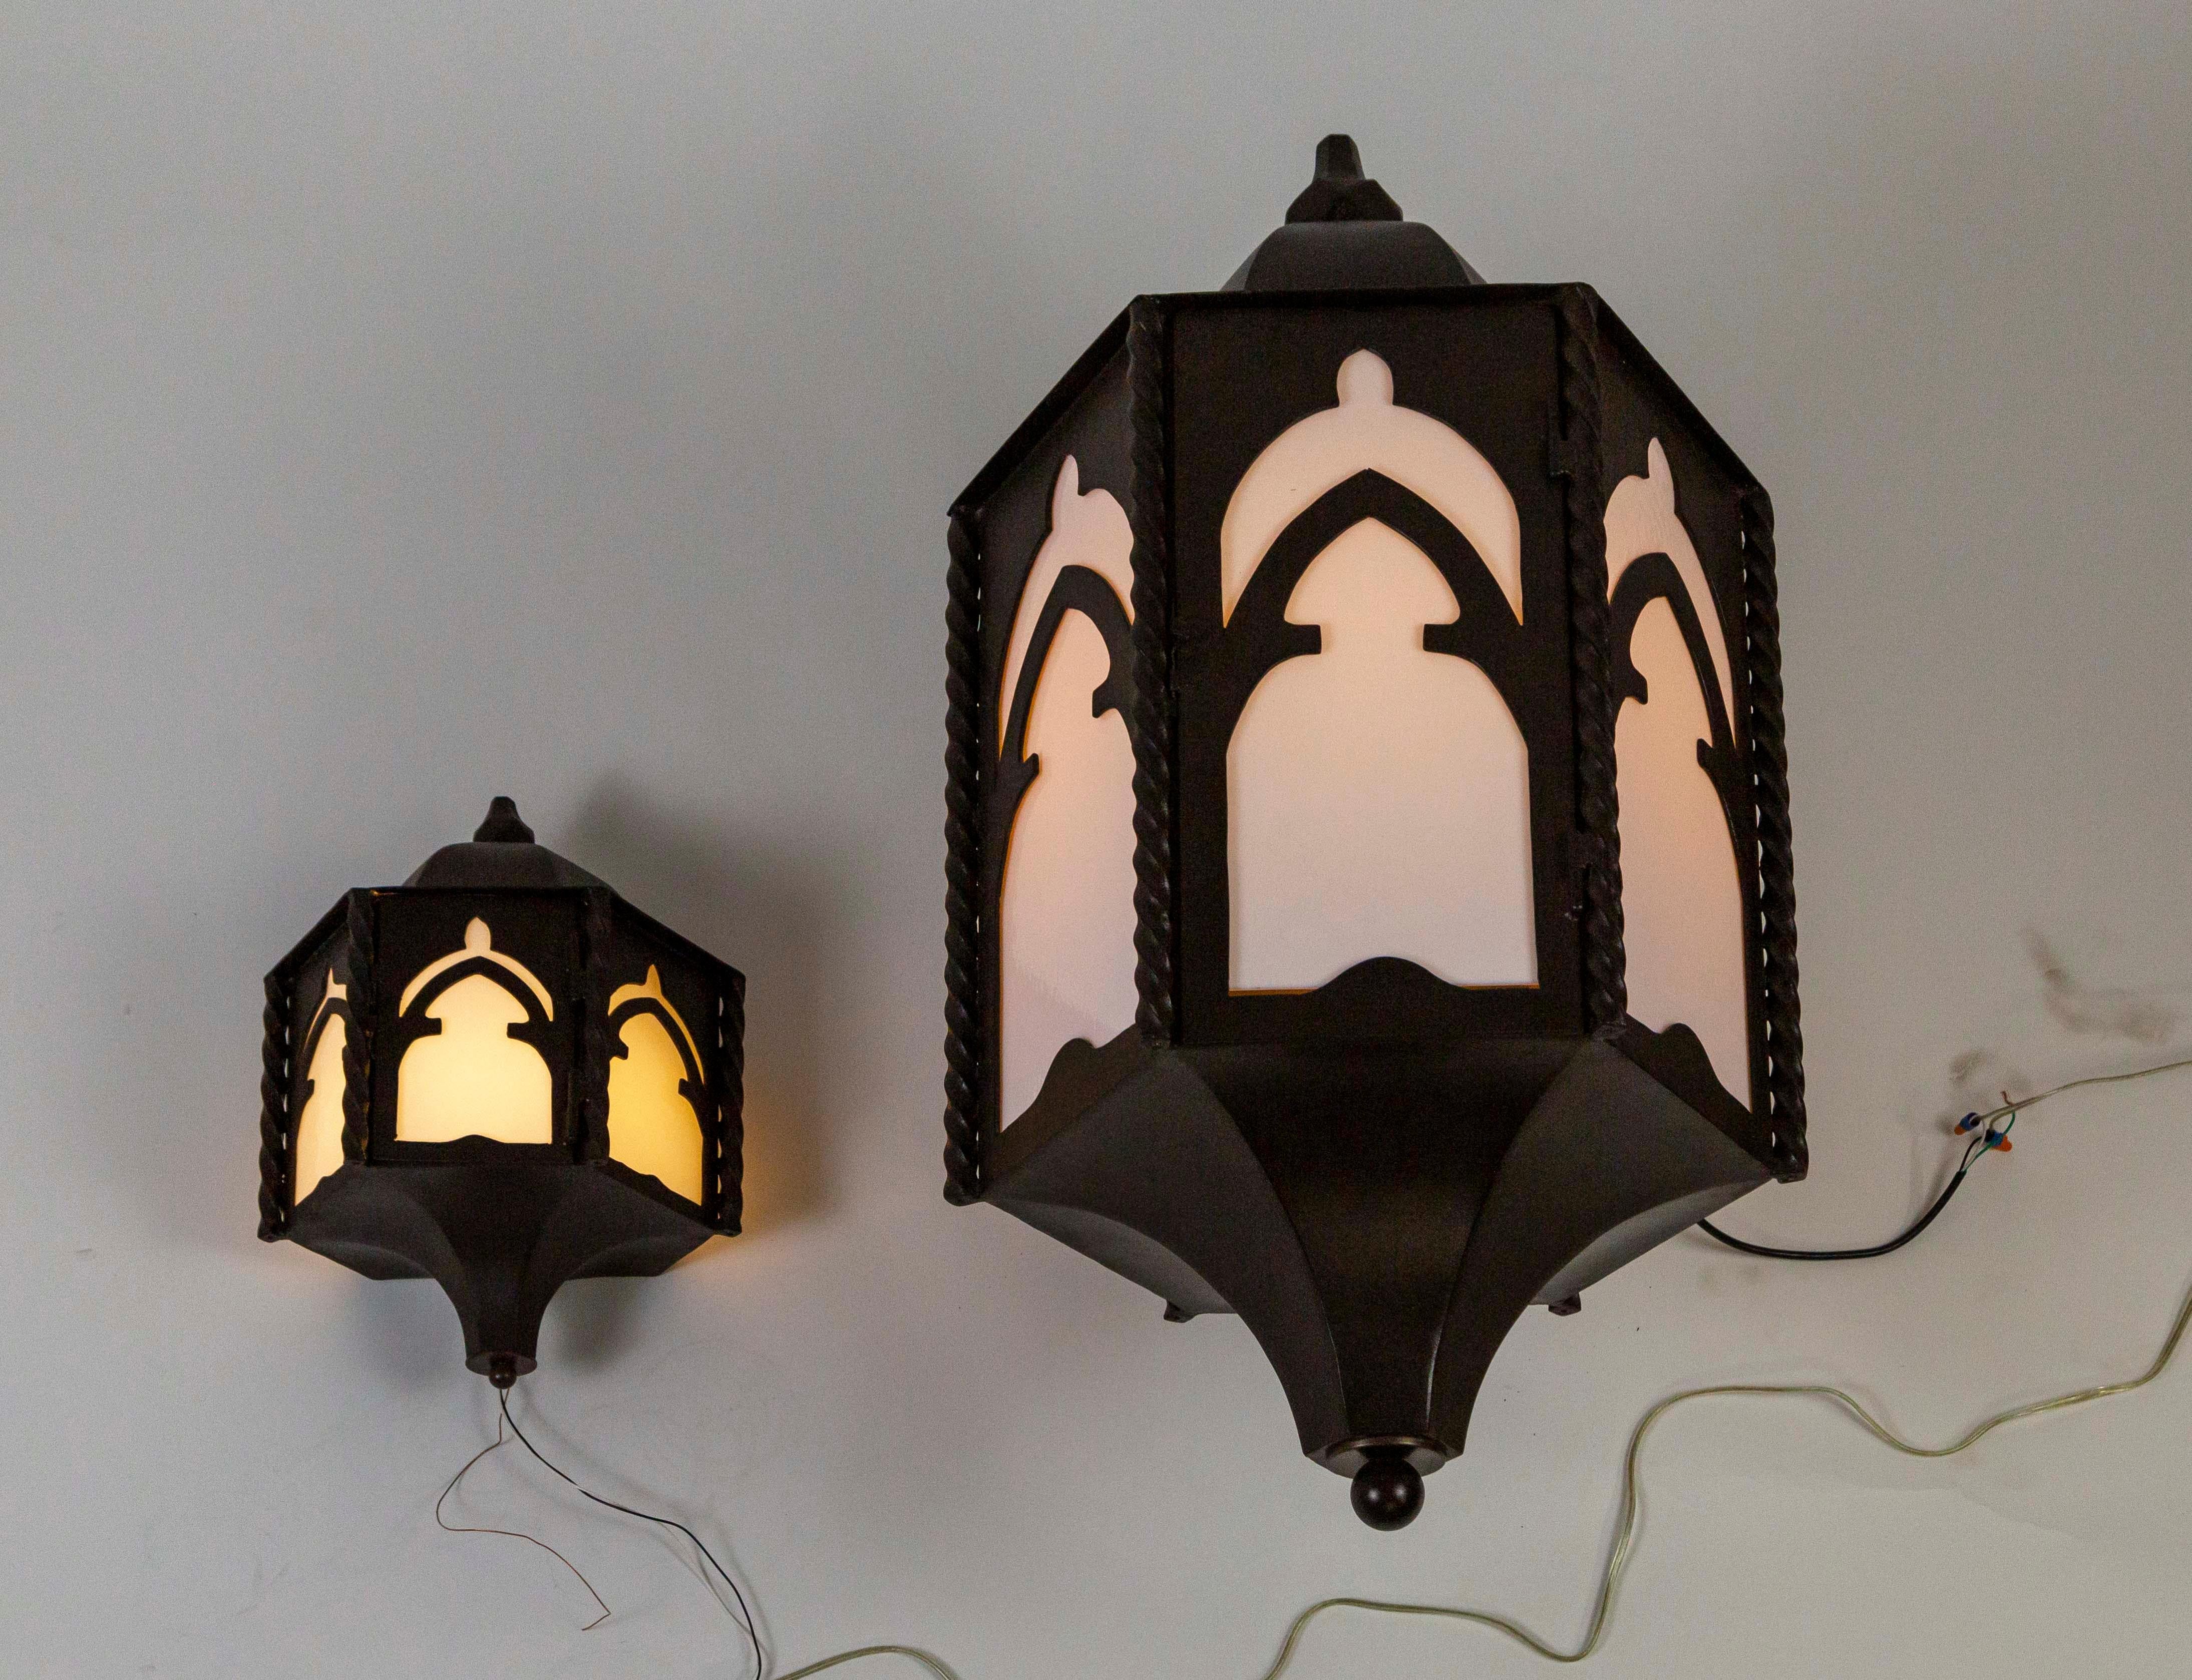 Giant Iron Gothic Arch Paul Ferrante Wall Lanterns w/ Milk Glass Panels 'Pair' In Good Condition For Sale In San Francisco, CA